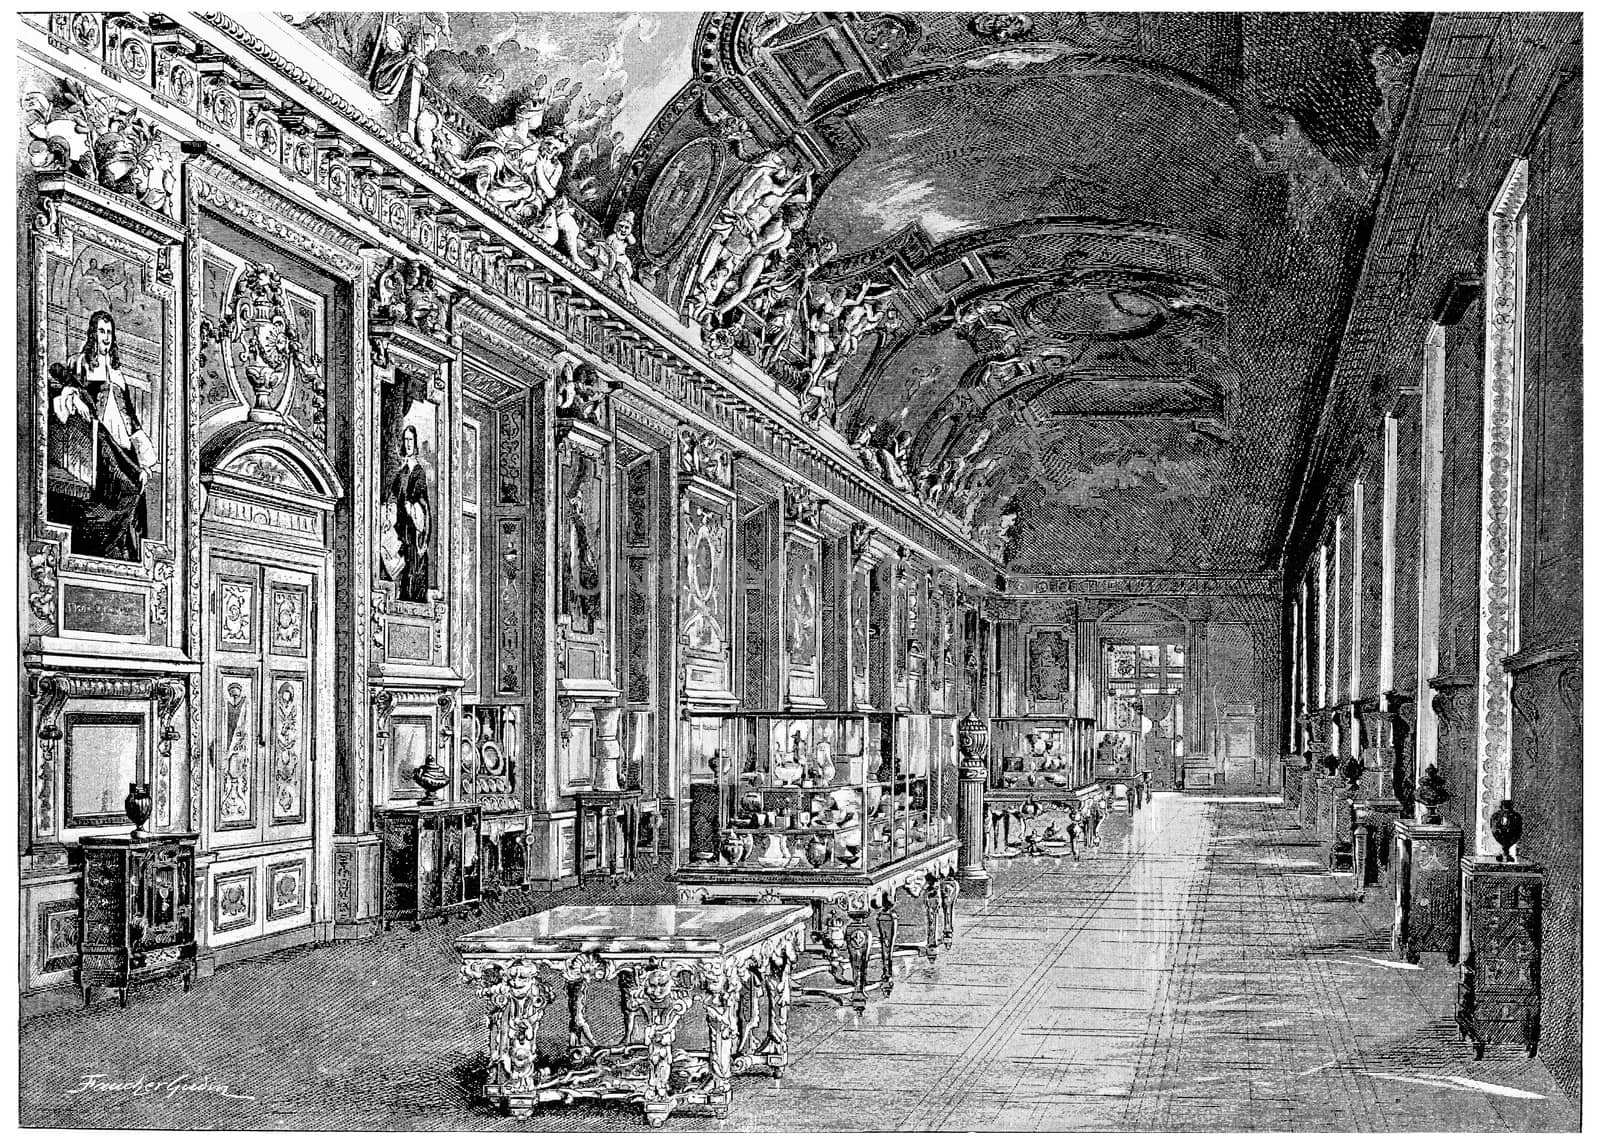 Louvre. Apollo Gallery, vintage engraving. by Morphart